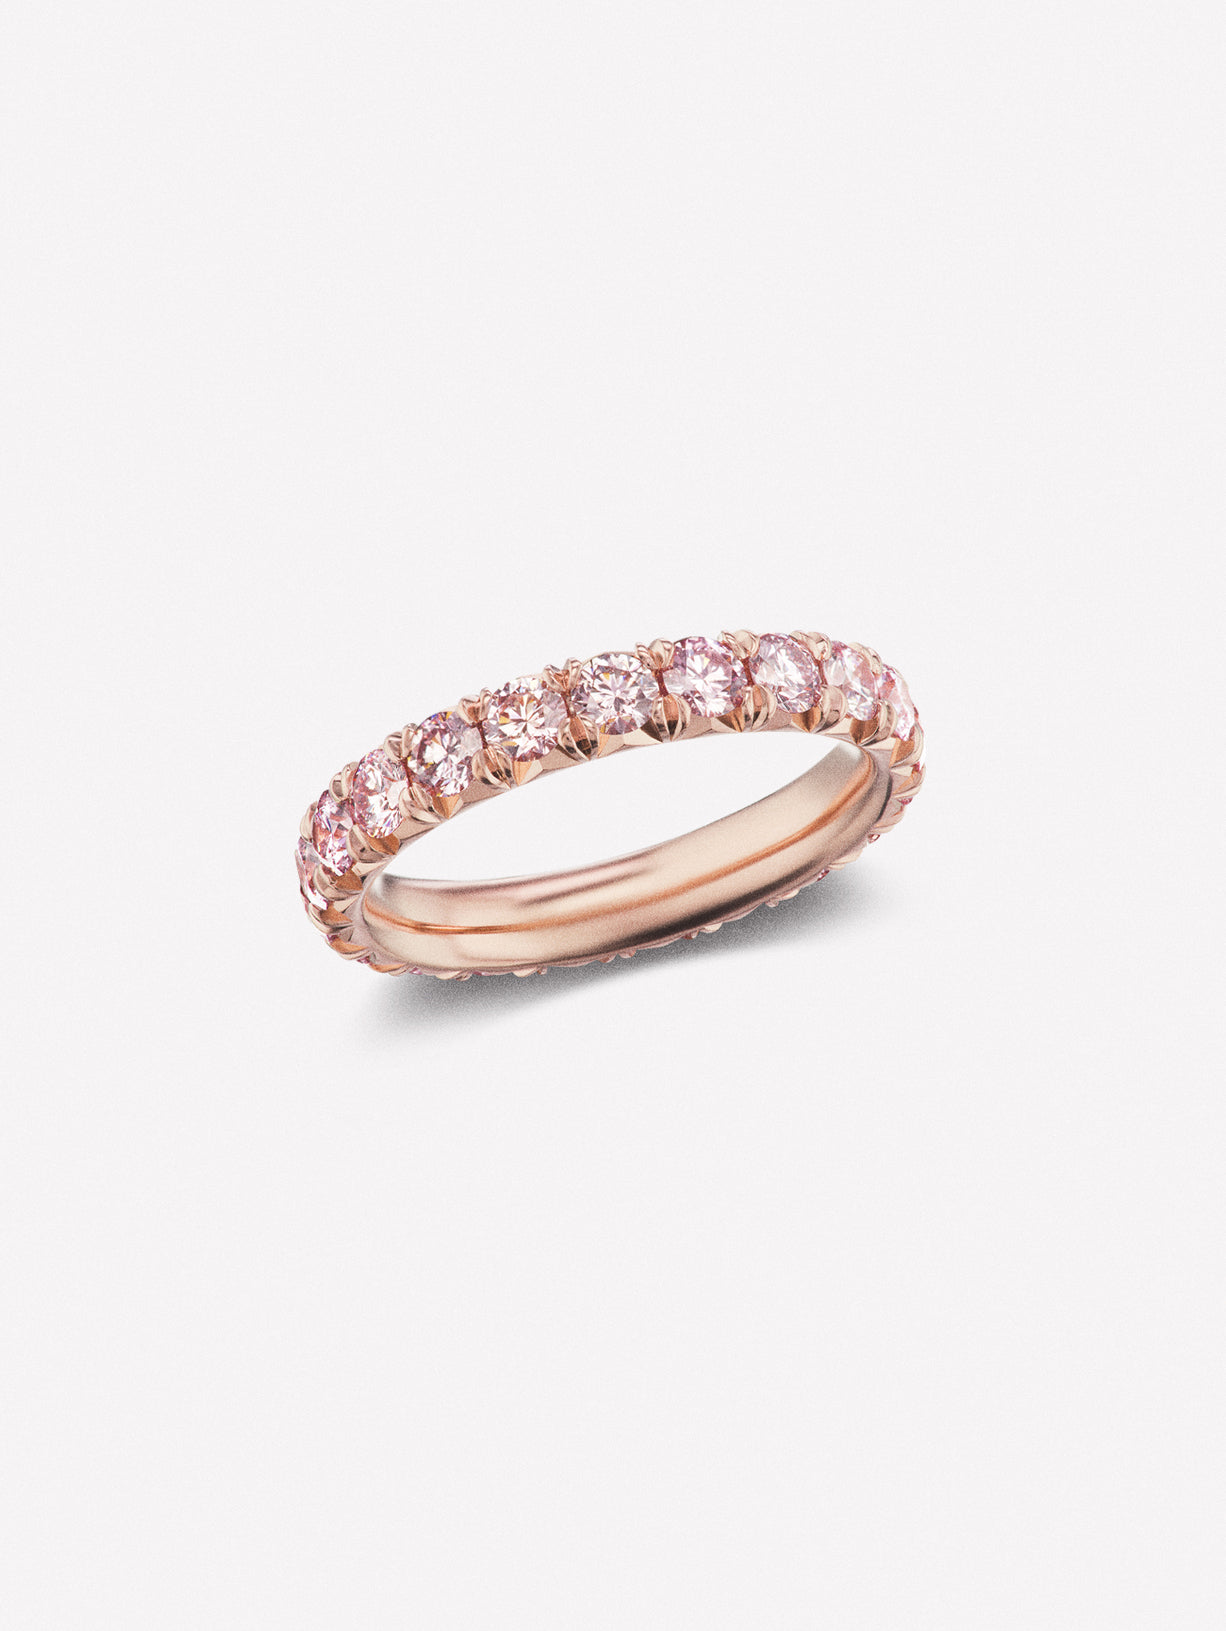 Argyle Pink™ Diamond French Pave Eternity Band 1.63ctw - Pink Diamonds, J FINE - J Fine, ring - Pink Diamond Jewelry, argyle-pink™-diamond-french-pave-eternity-band-1-63ctw-by-j-f-i-n-e -